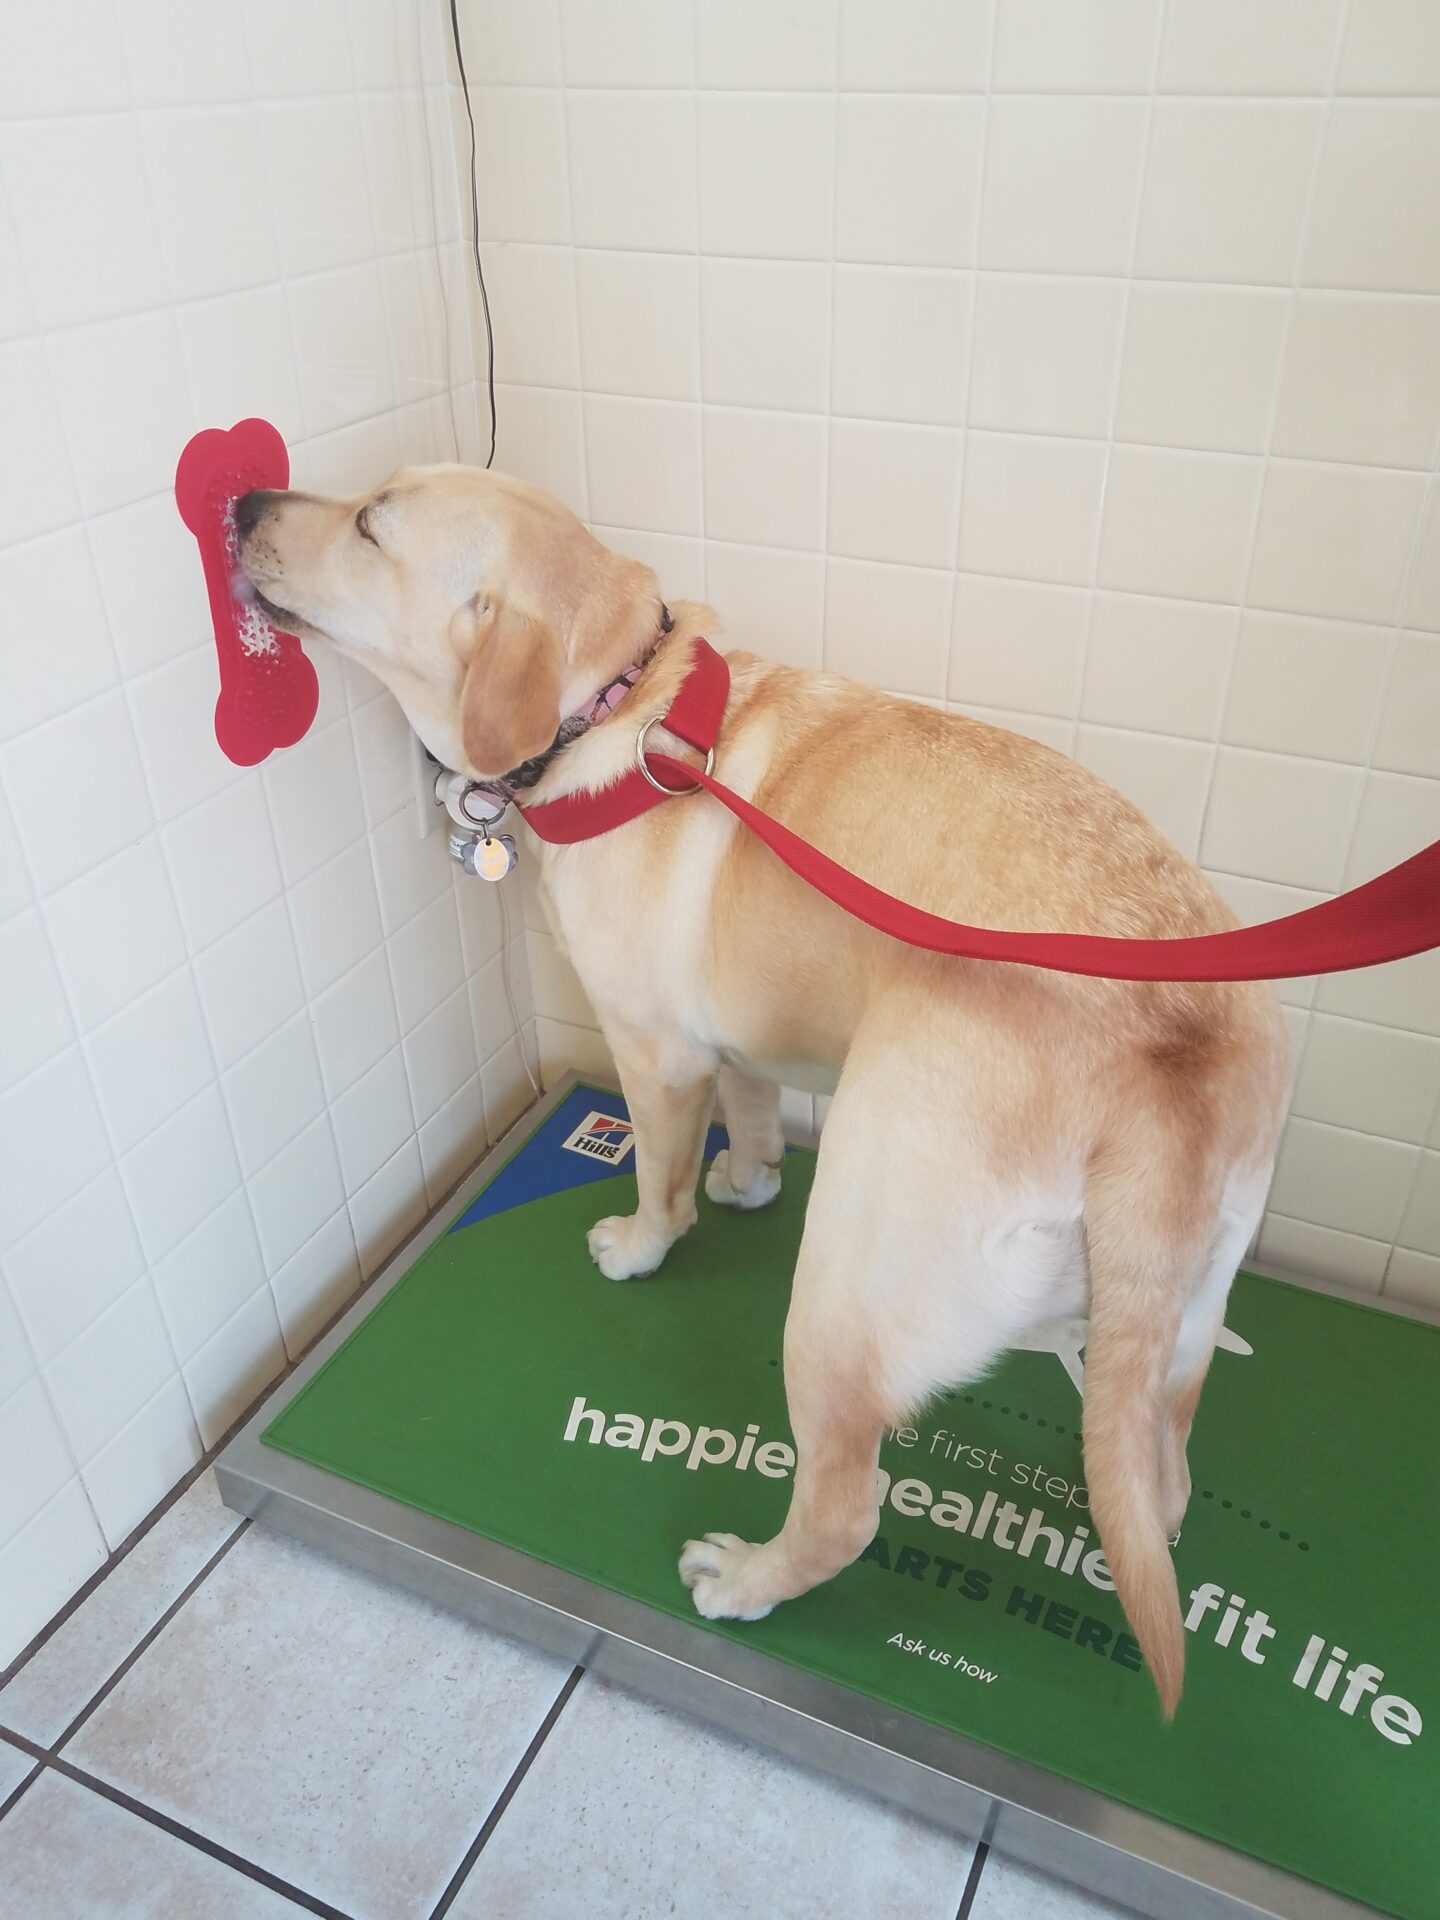 Tan dog licking a treat sticker on the wall so they are positioned on a scale to get an accurate reading of their weight